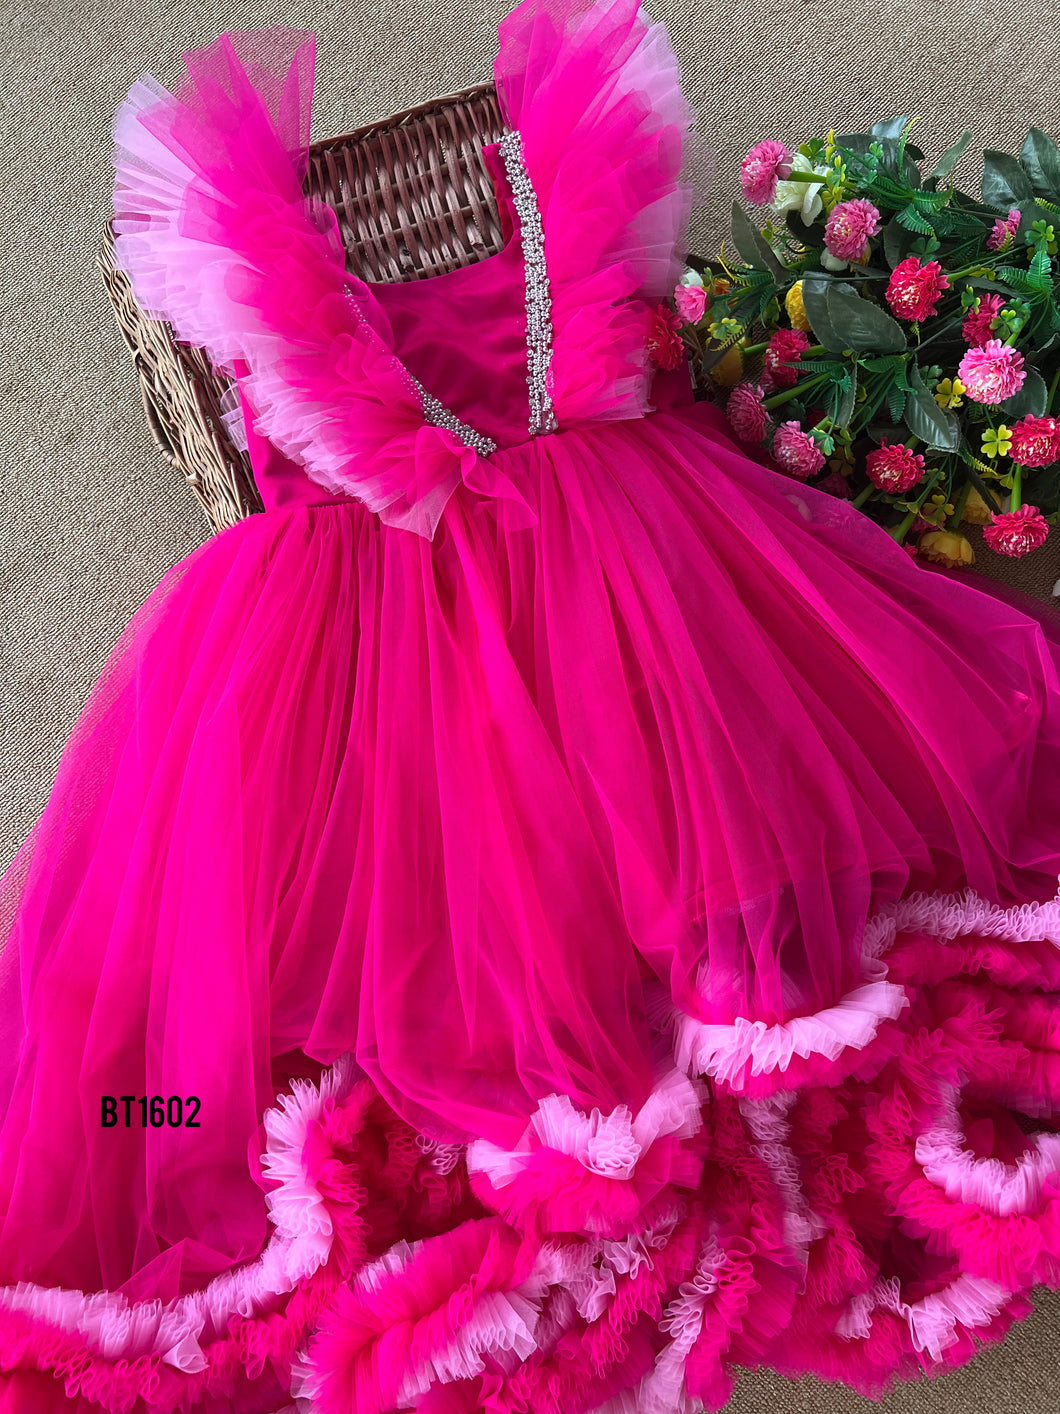 BT1602 Fuchsia Fantasy: The Fairy-Tale Party Gown for Little Stars